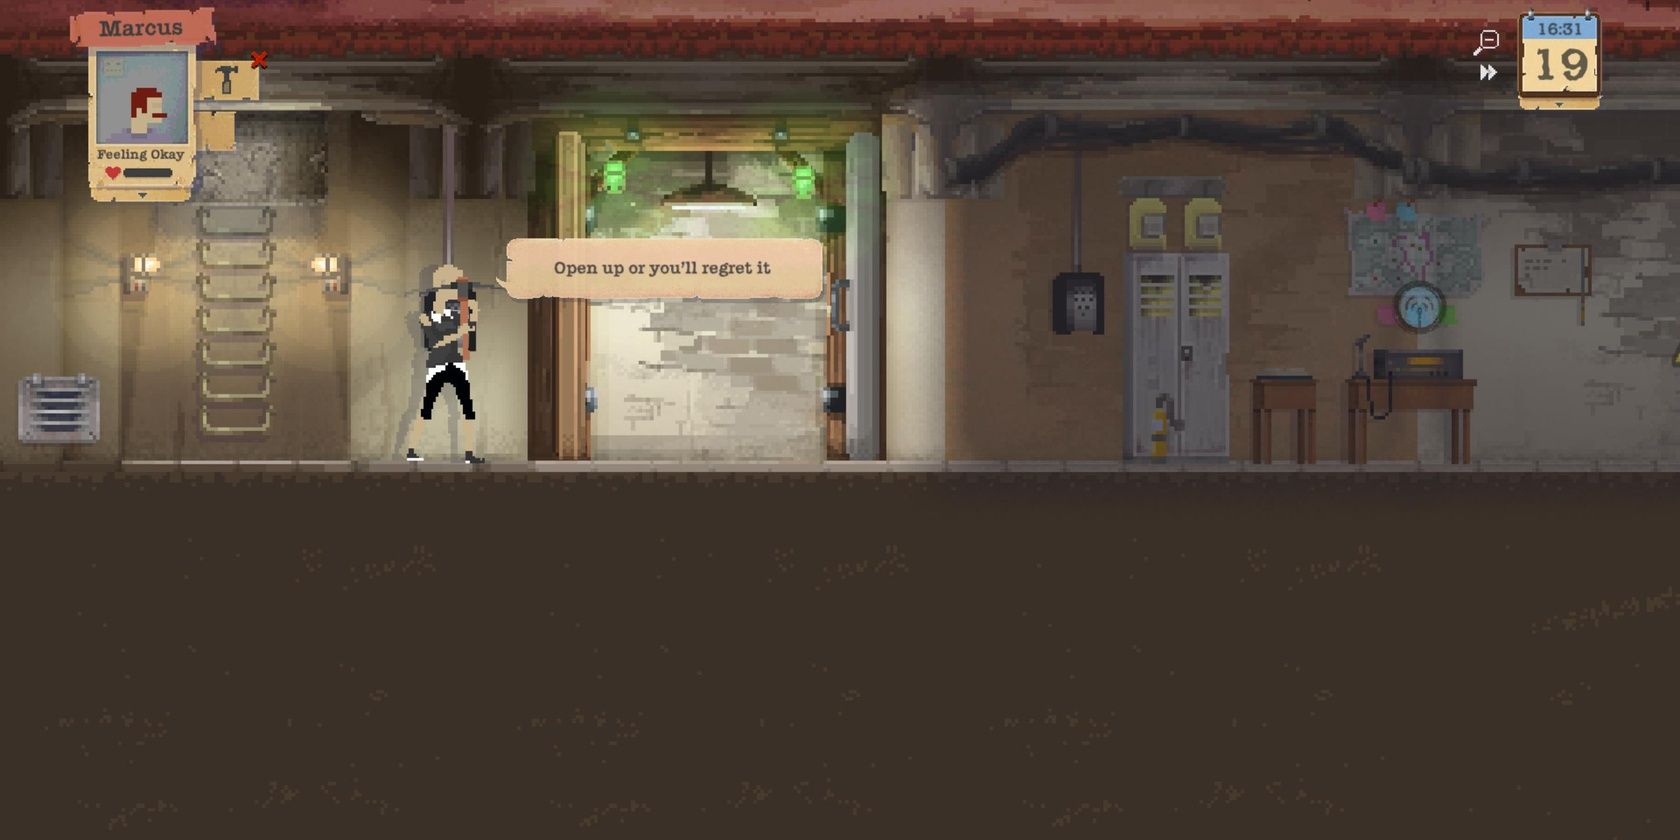 A raider approaching the shelter in Sheltered.